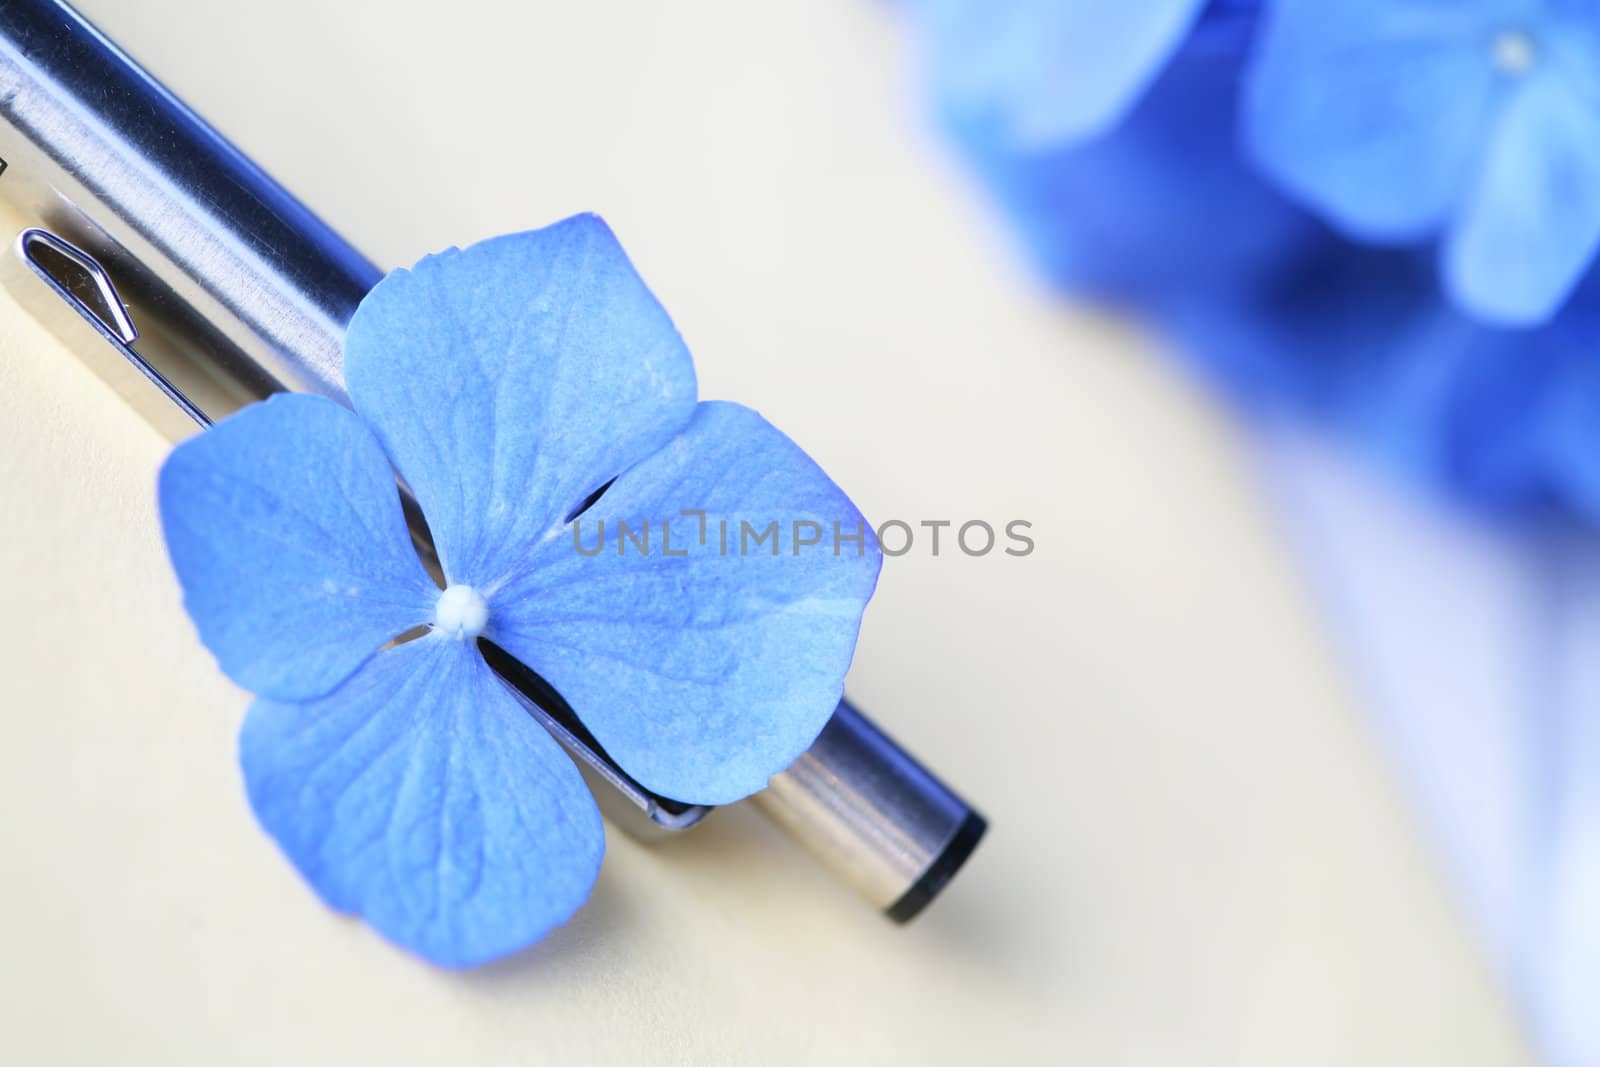 Shallow focus of hydrangea flower against a pen and paper stationery, letter writing theme.